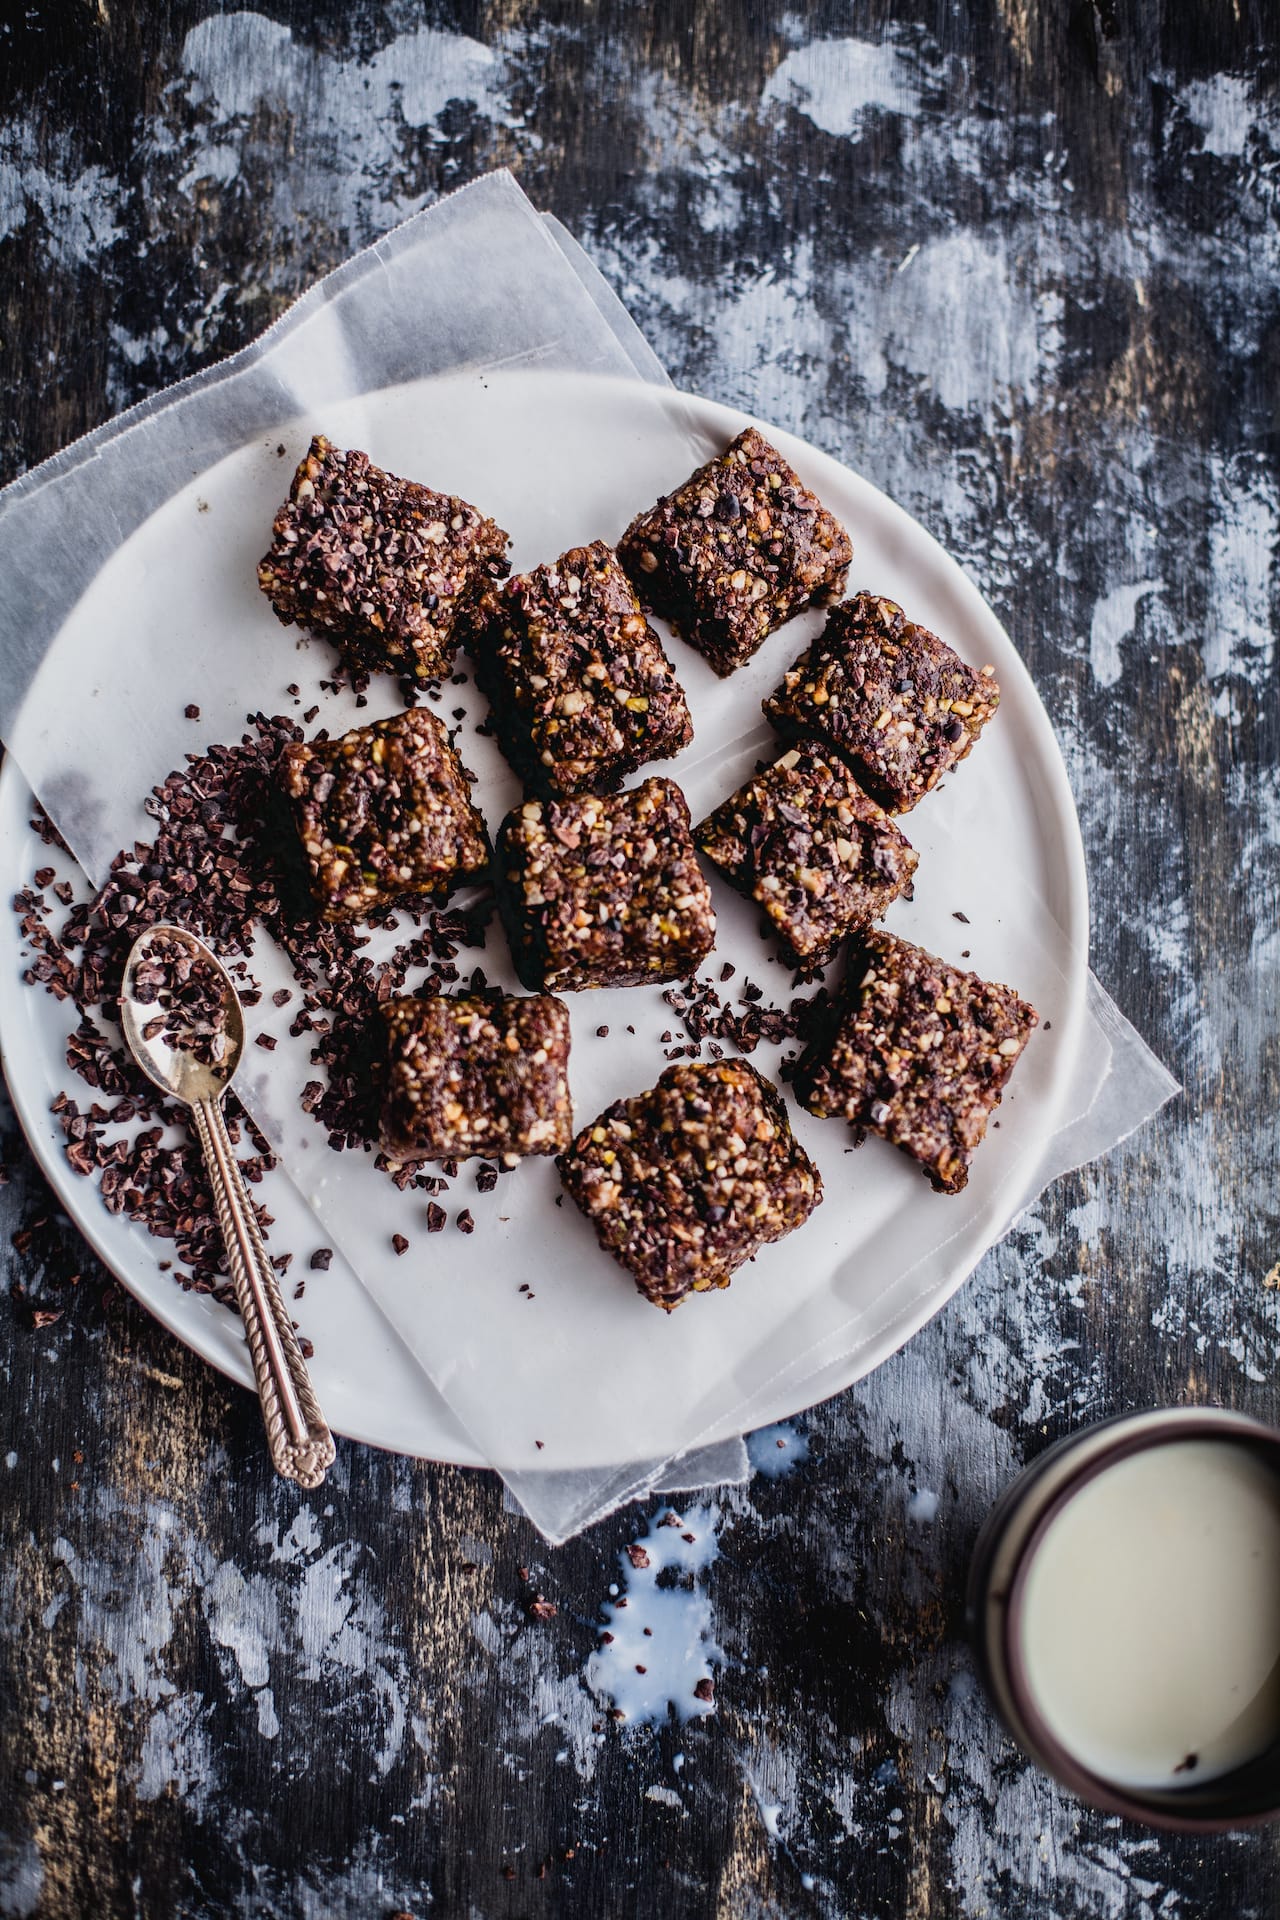 Date And Nuts Energy Bars With Cocoa Nibs | Playful Cooking